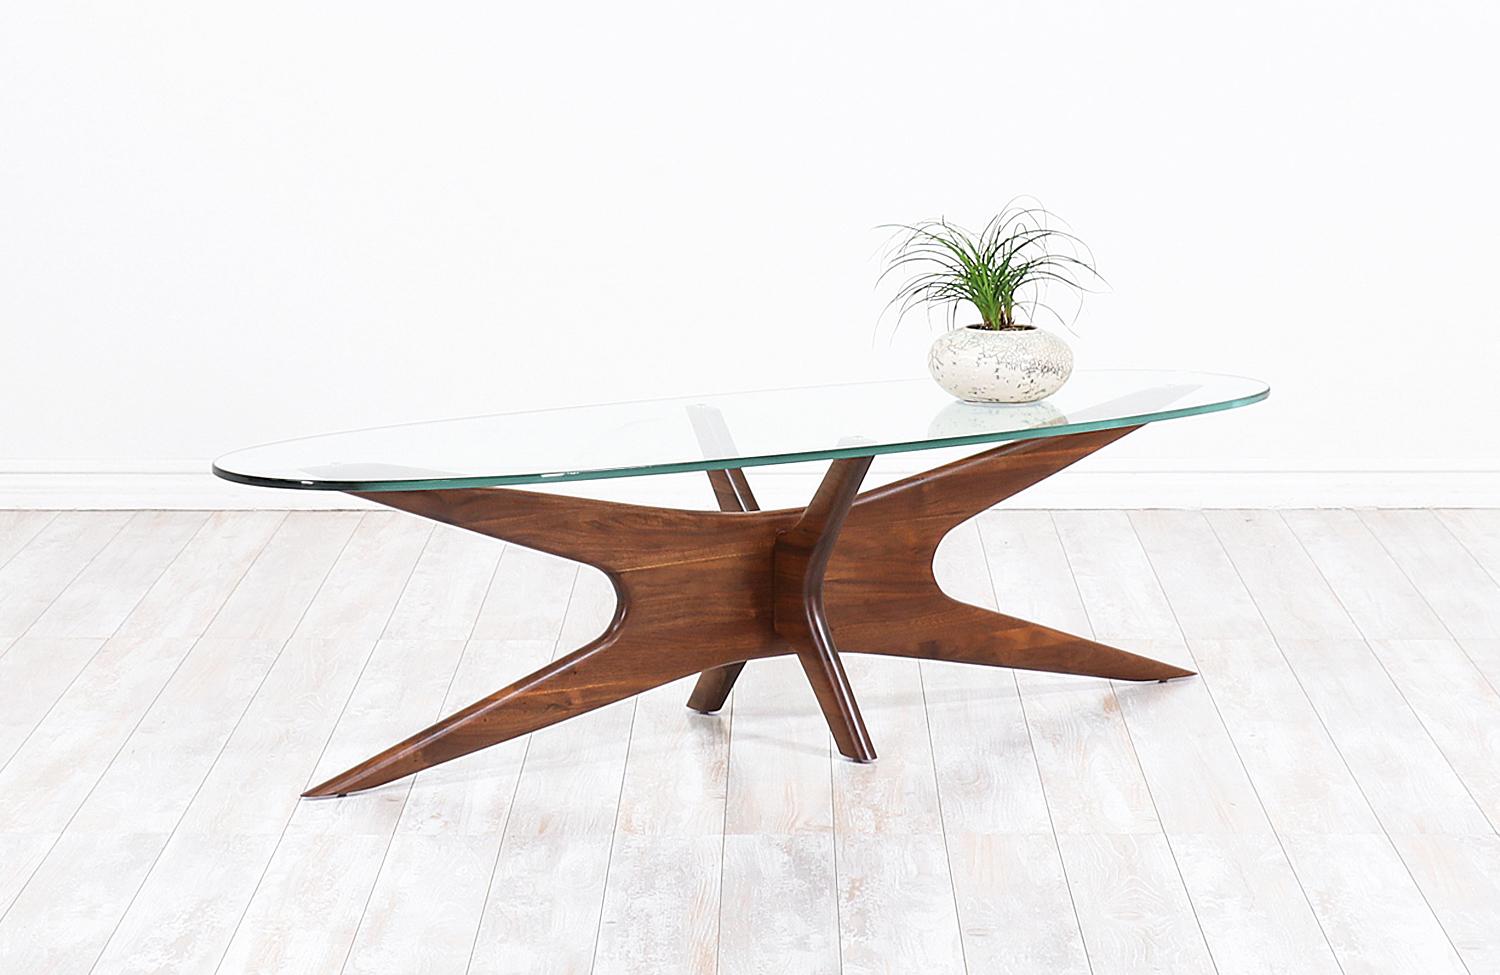 Mid-Century Modern coffee table Model 893-TGO designed by Adrian Pearsall for Craft Associates in the United States, circa 1960s. Like many of Pearsall’s designs, this exceptionally crafted coffee table incorporates the fun and sophisticated shapes